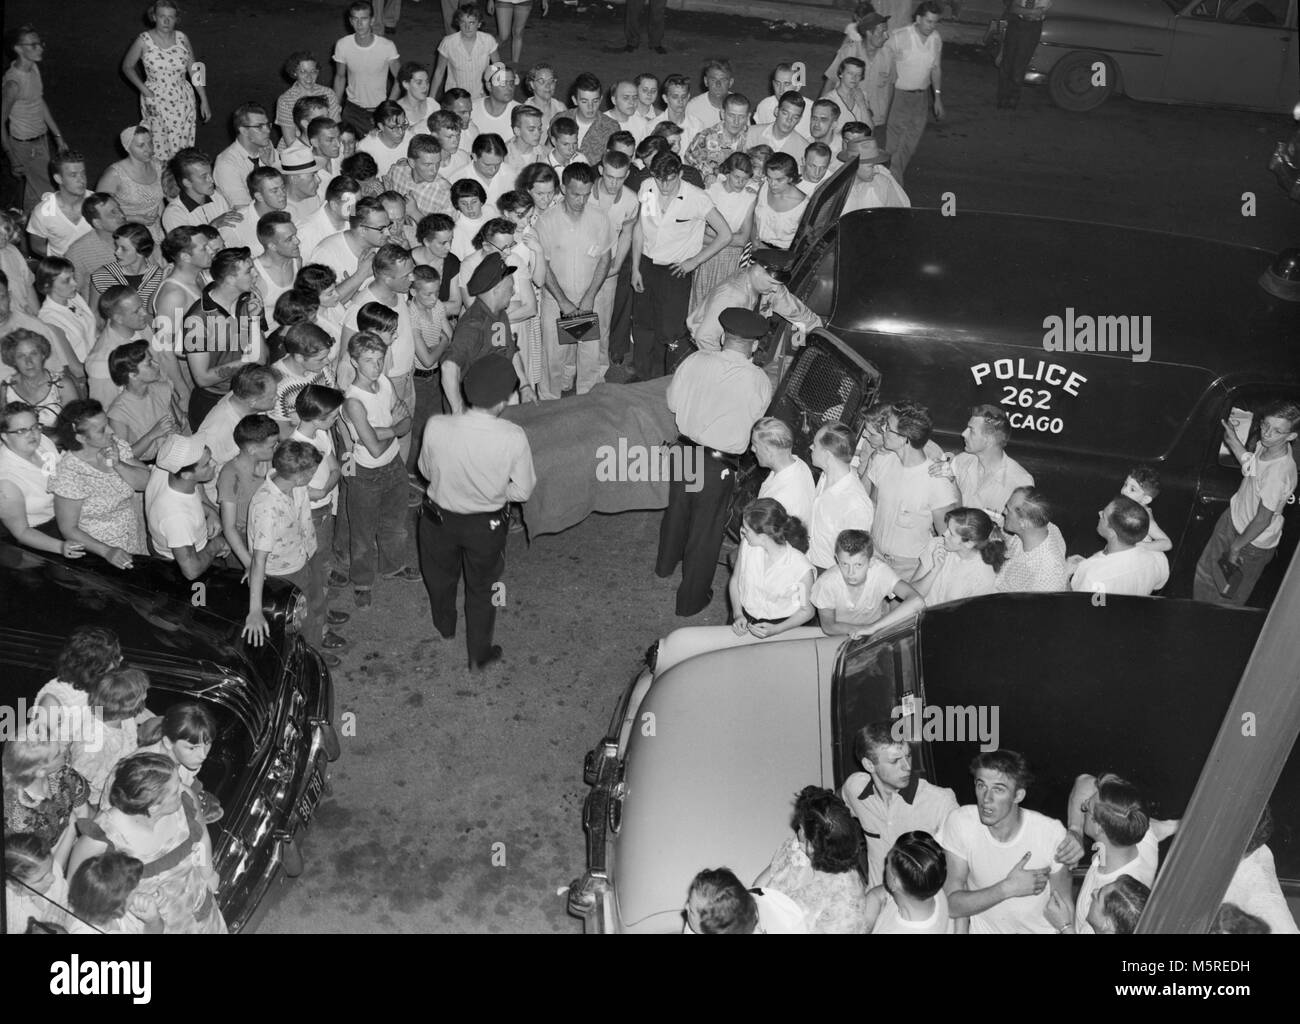 A neighborhood crowd watches as the body of murder victim is loaded in the back of police hearse in the South Side of Chicago, ca. 1955. Stock Photo